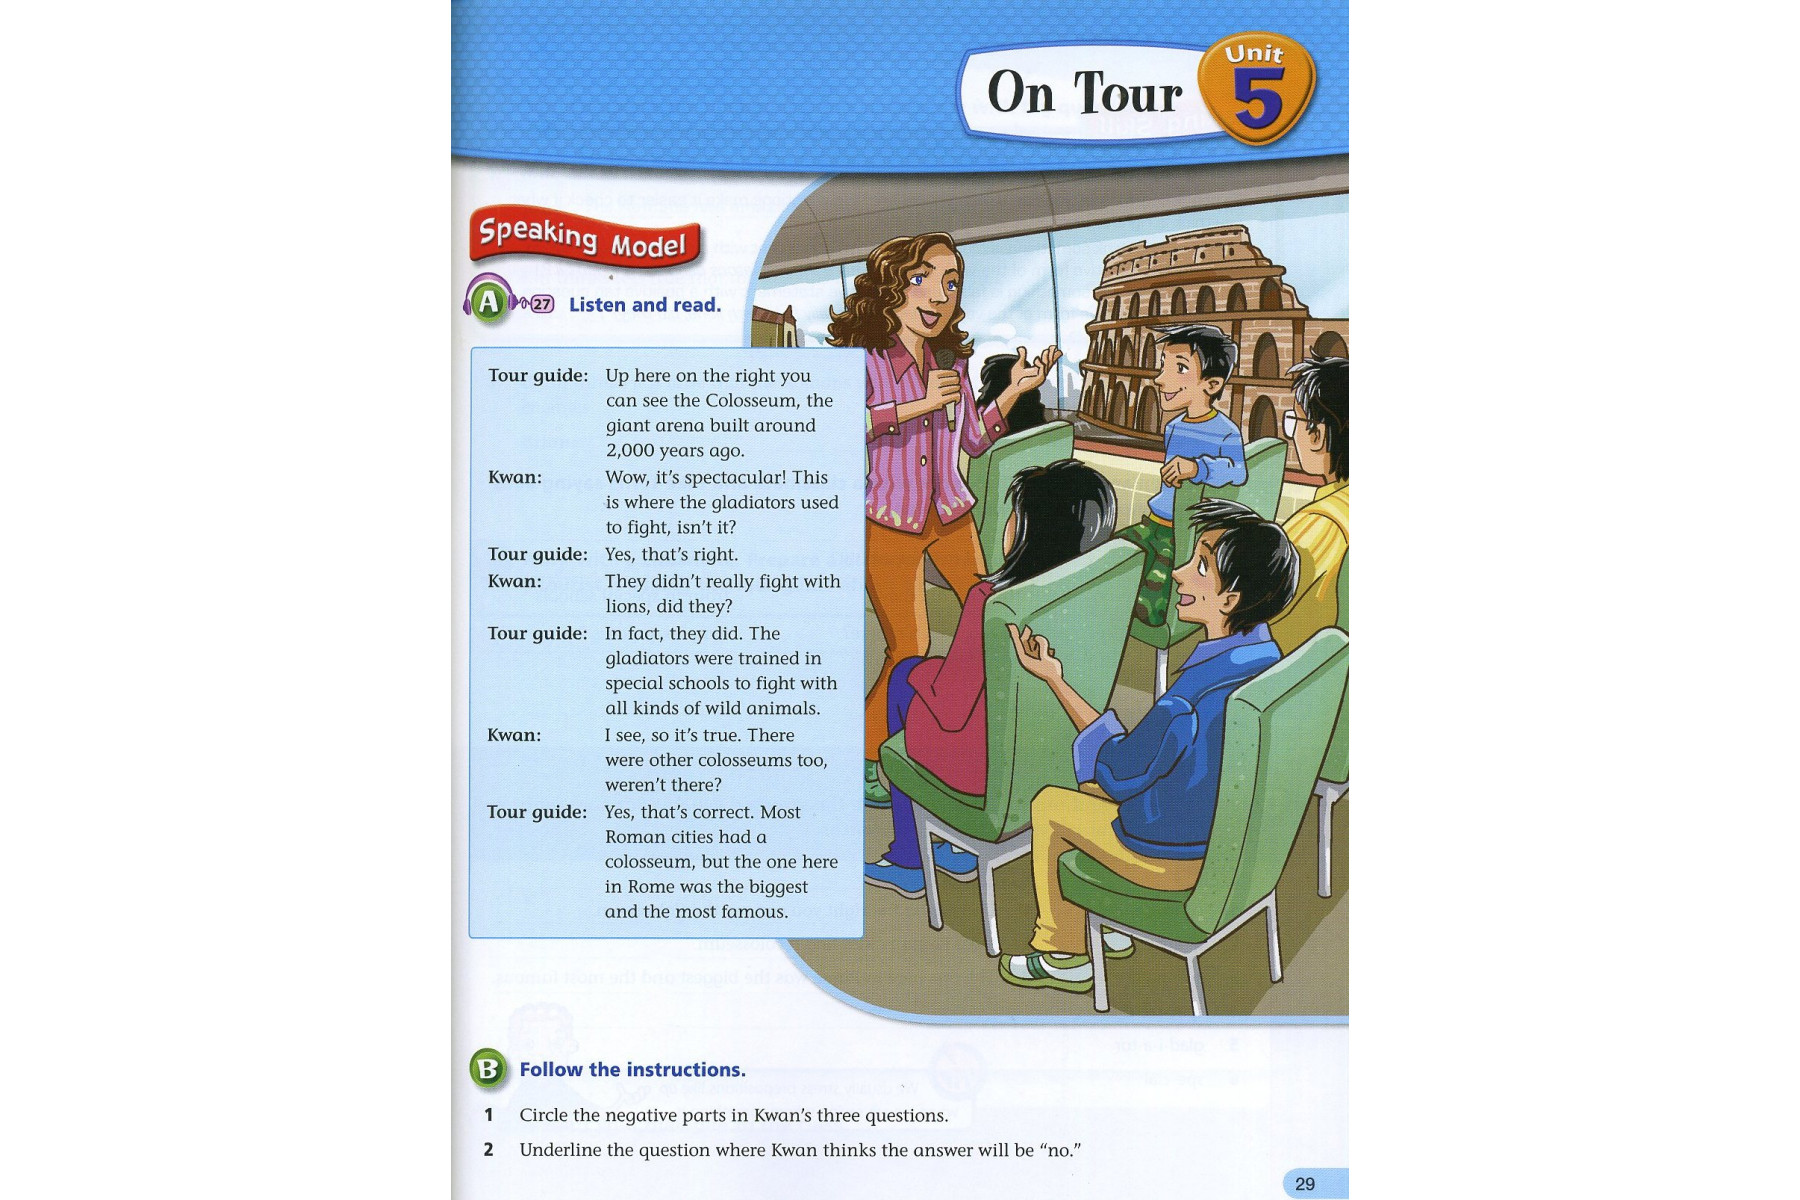 Boost! Speaking: Student Book  Level 3